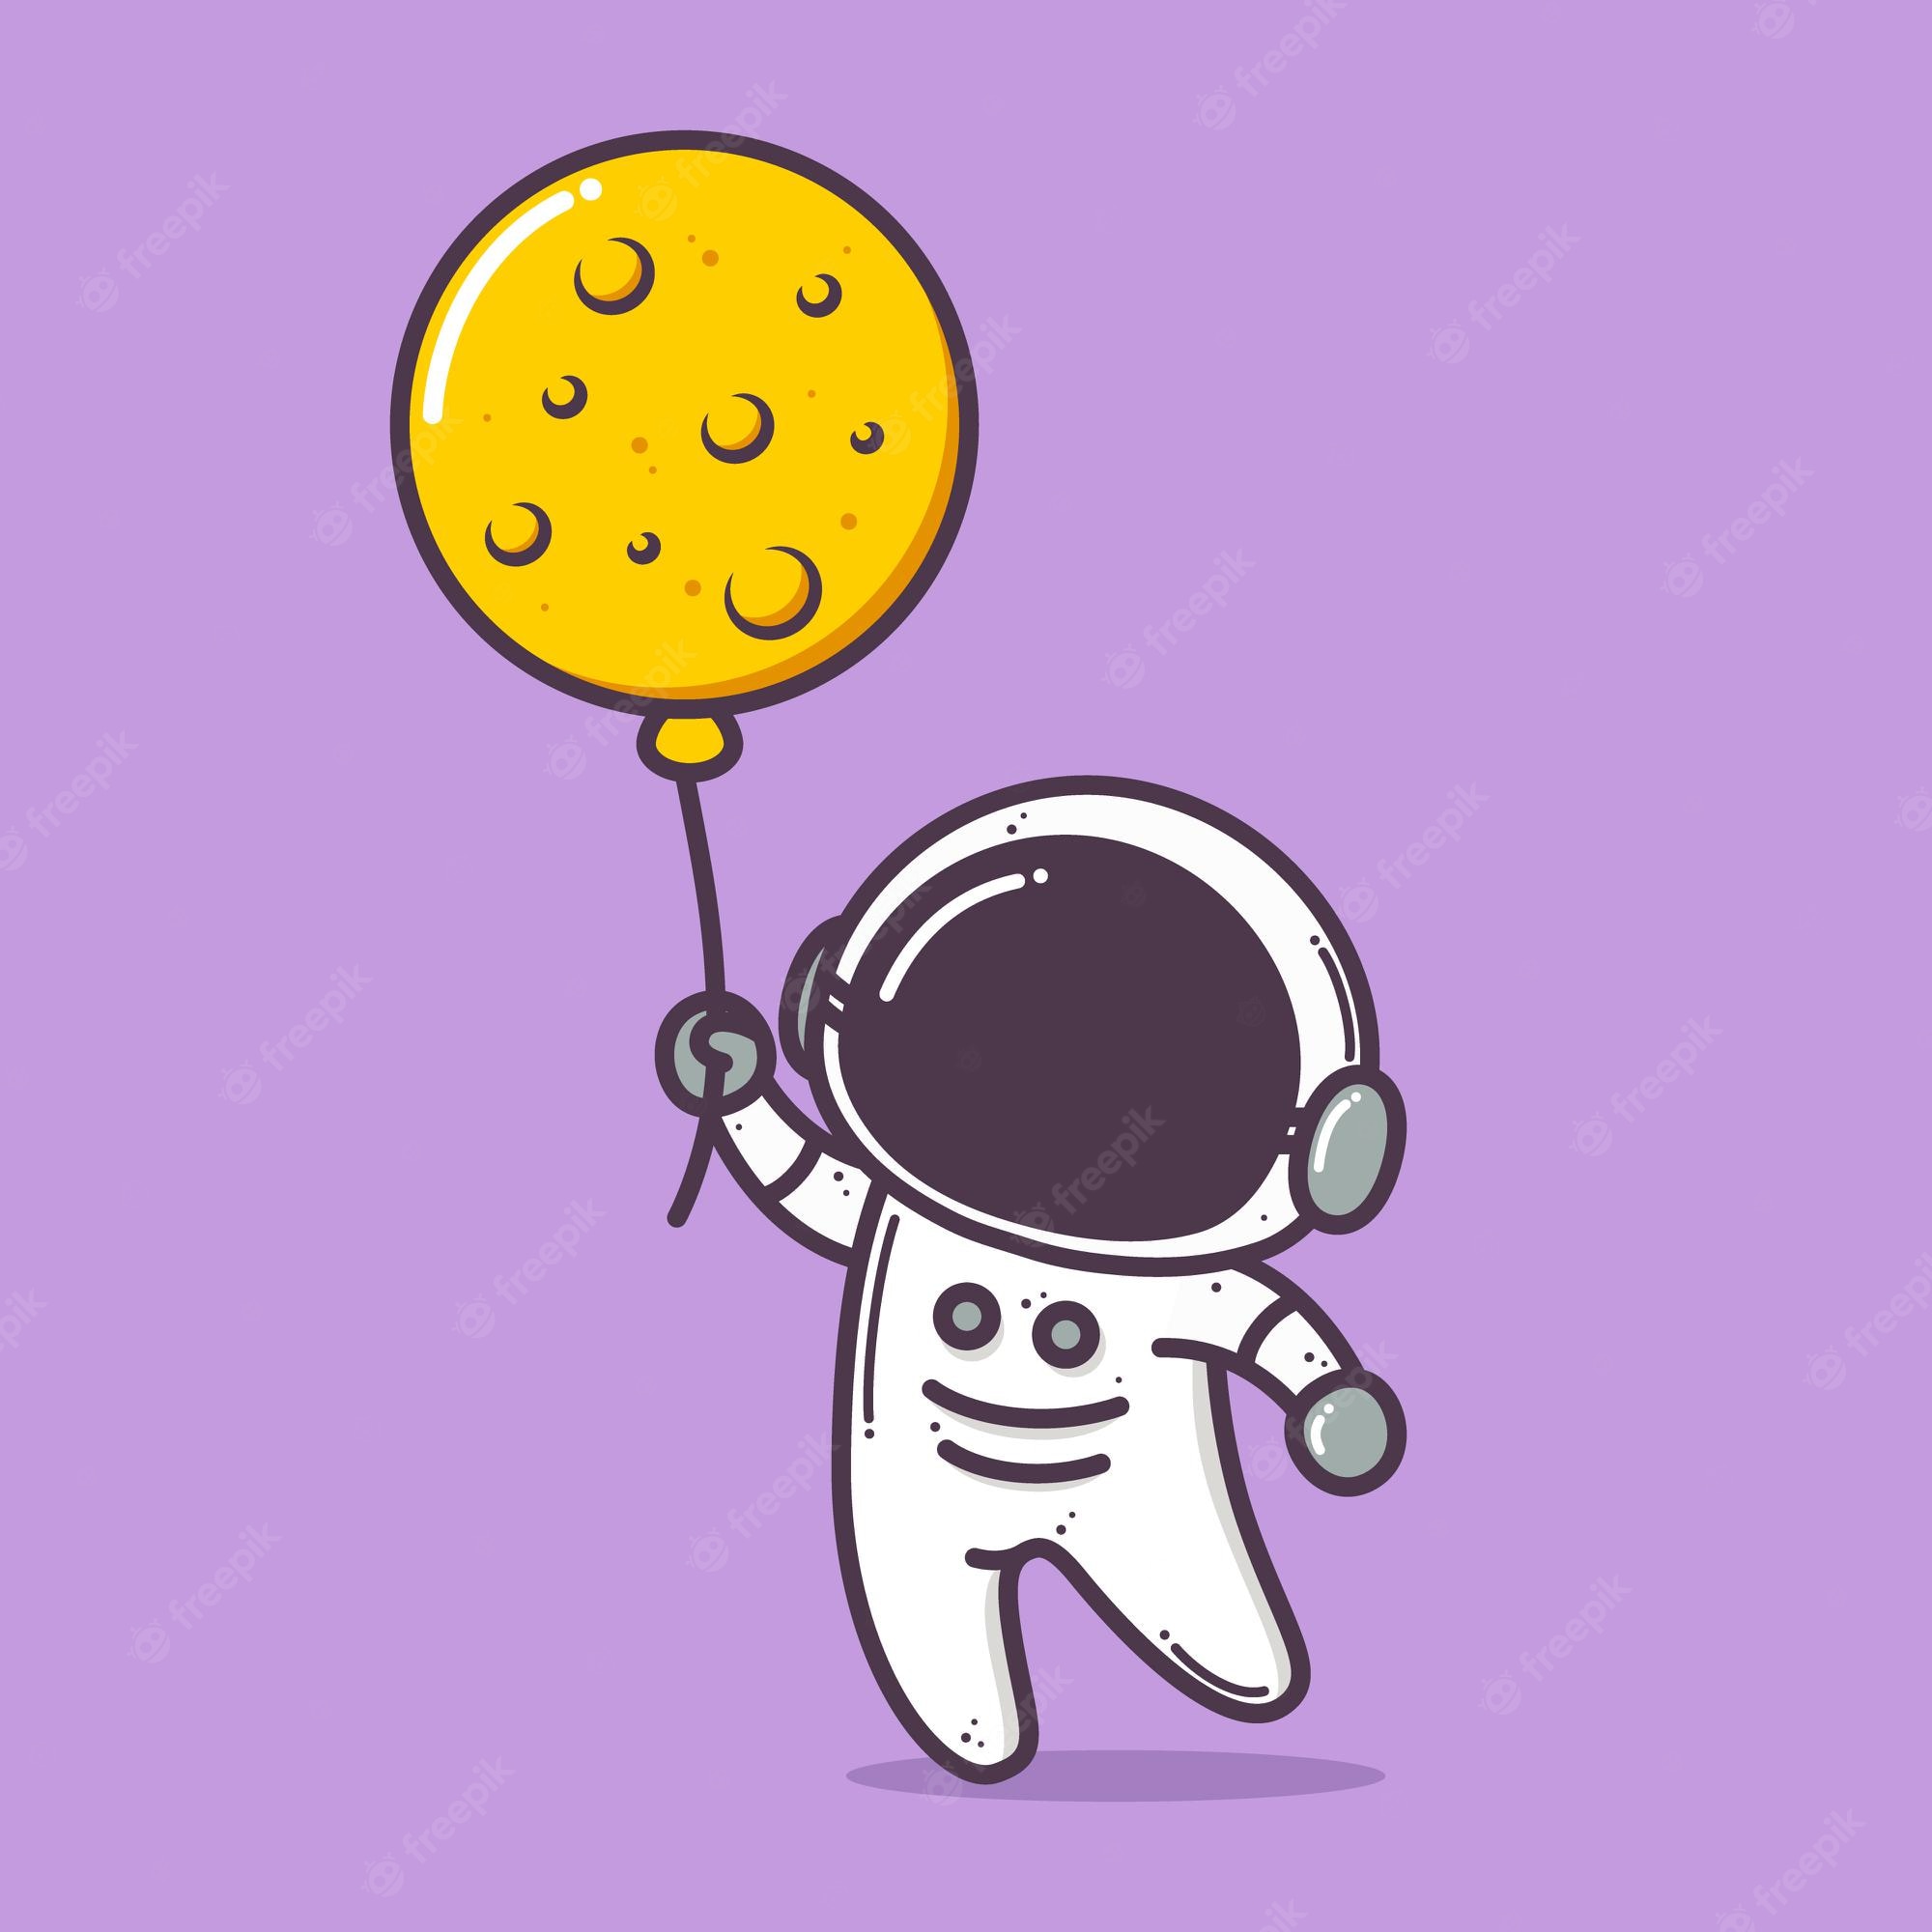 Astronaut Holding Of Colorful Balloons Wallpapers